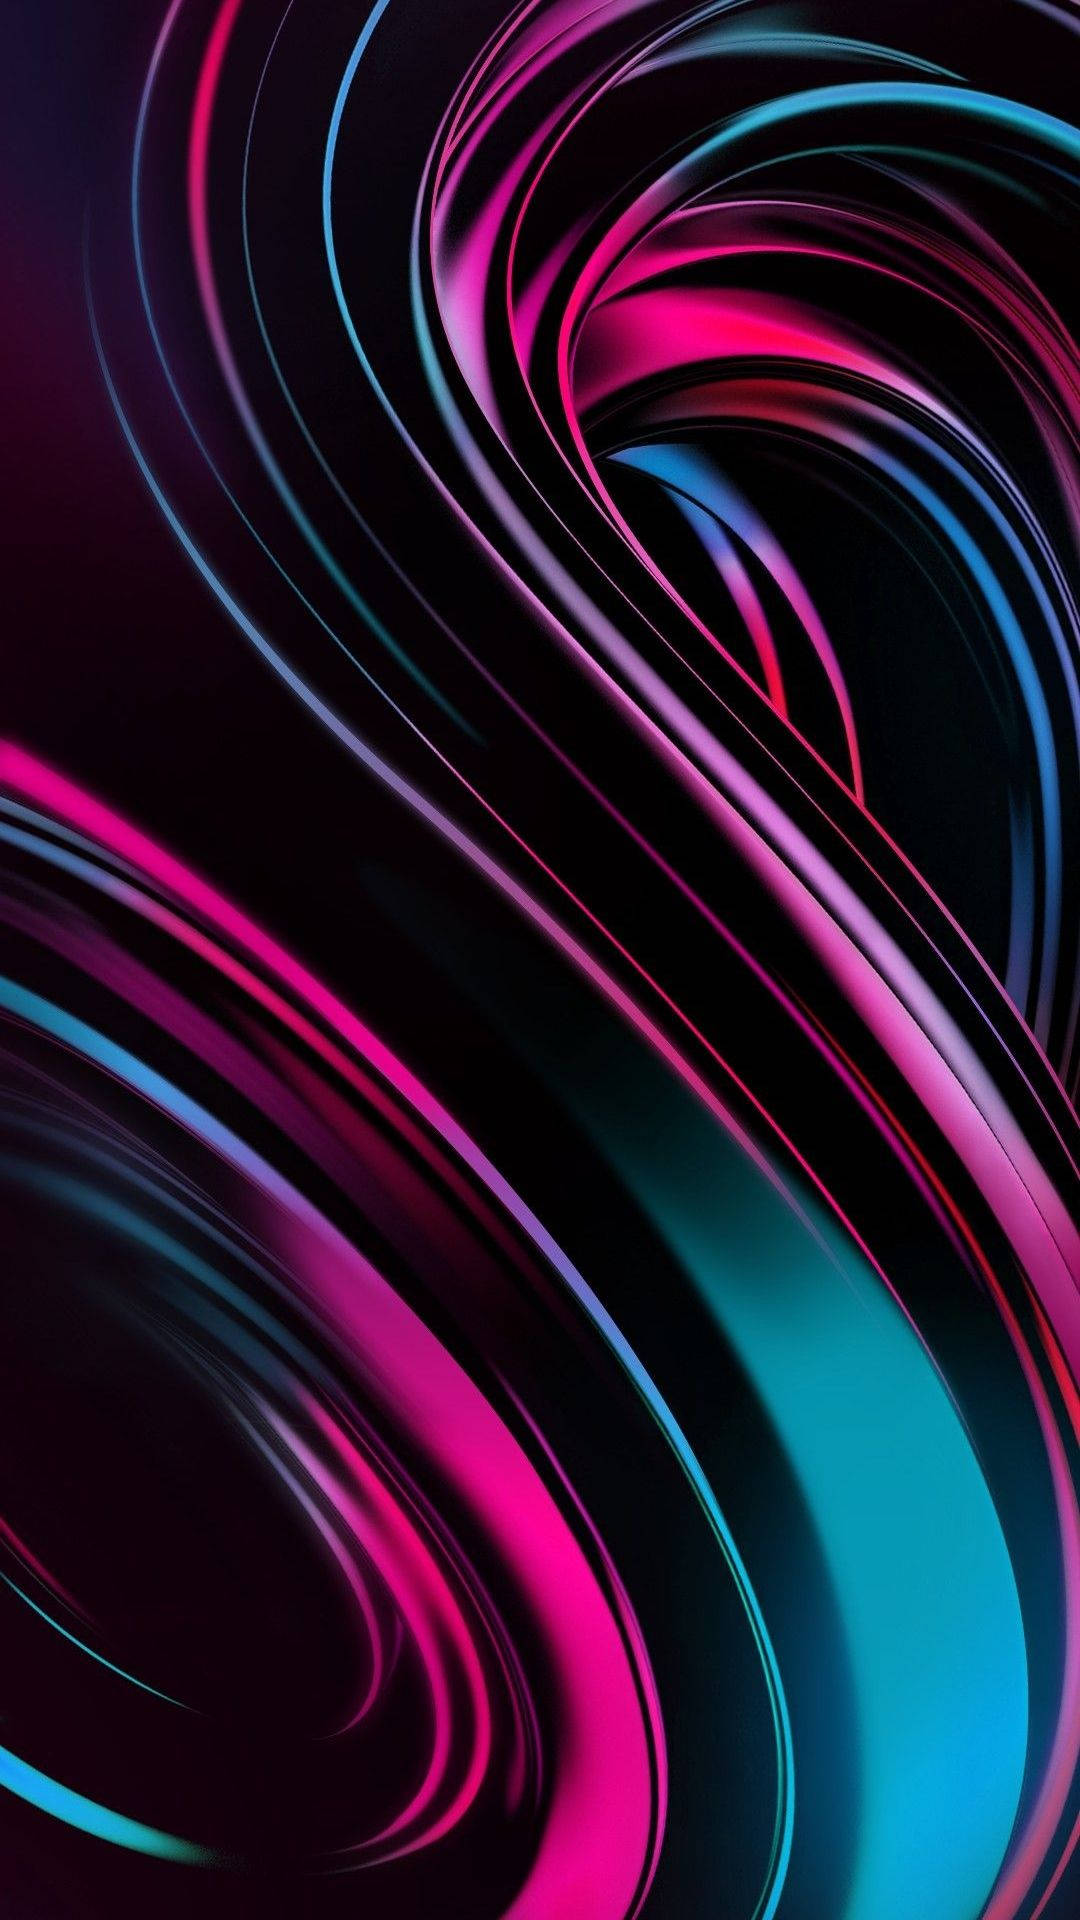 Brighten Up Your Life with a Colorful AMOLED Display Wallpaper